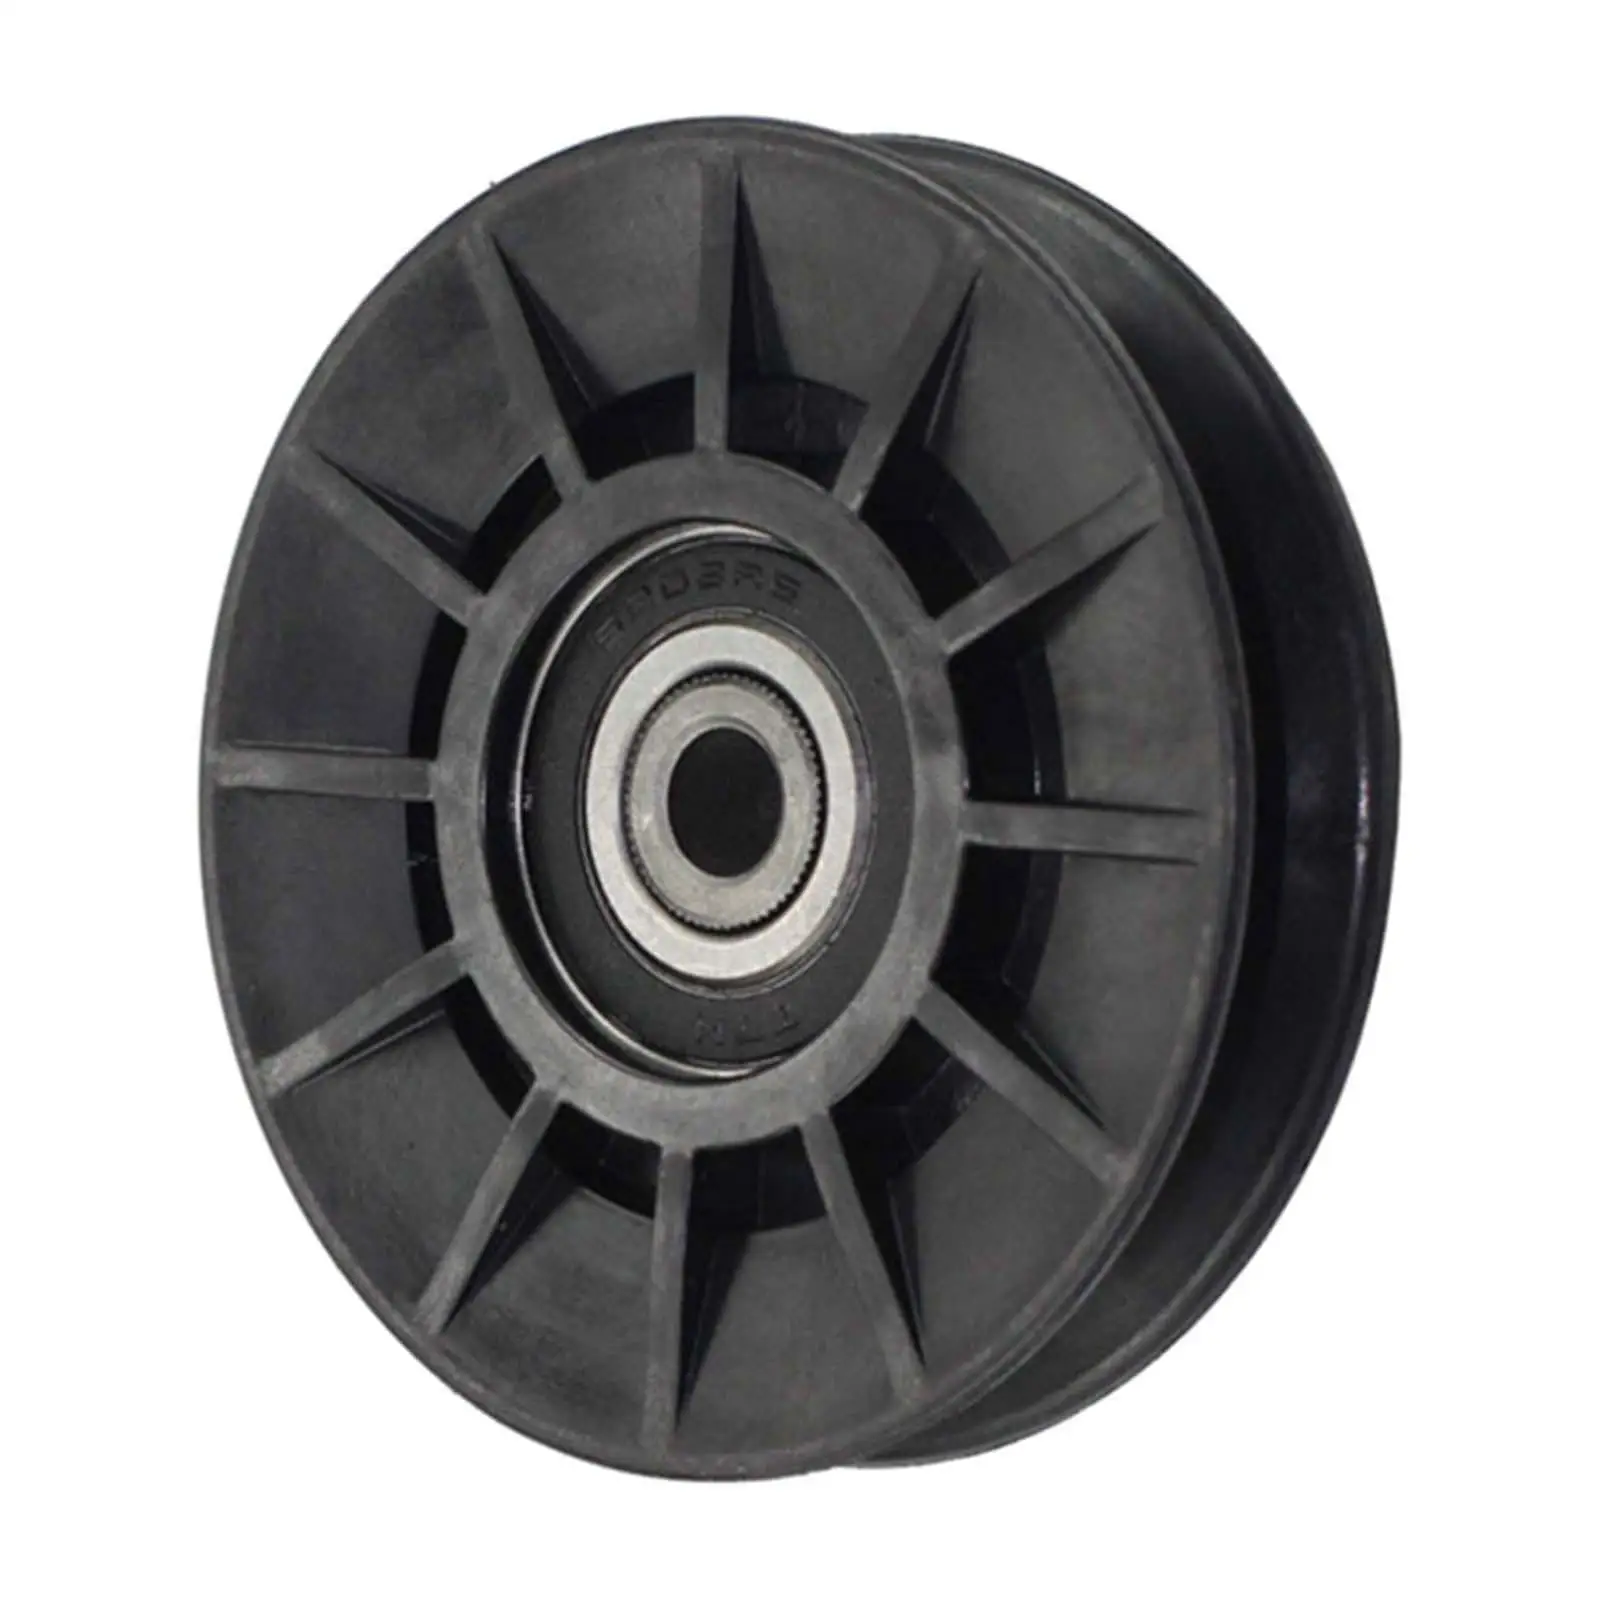 Replacement Drive Belt Idler Pulley Accessories Idler Pulley Lawn Mower Idler Pulley for 280659 532194226 Garden Power Tools